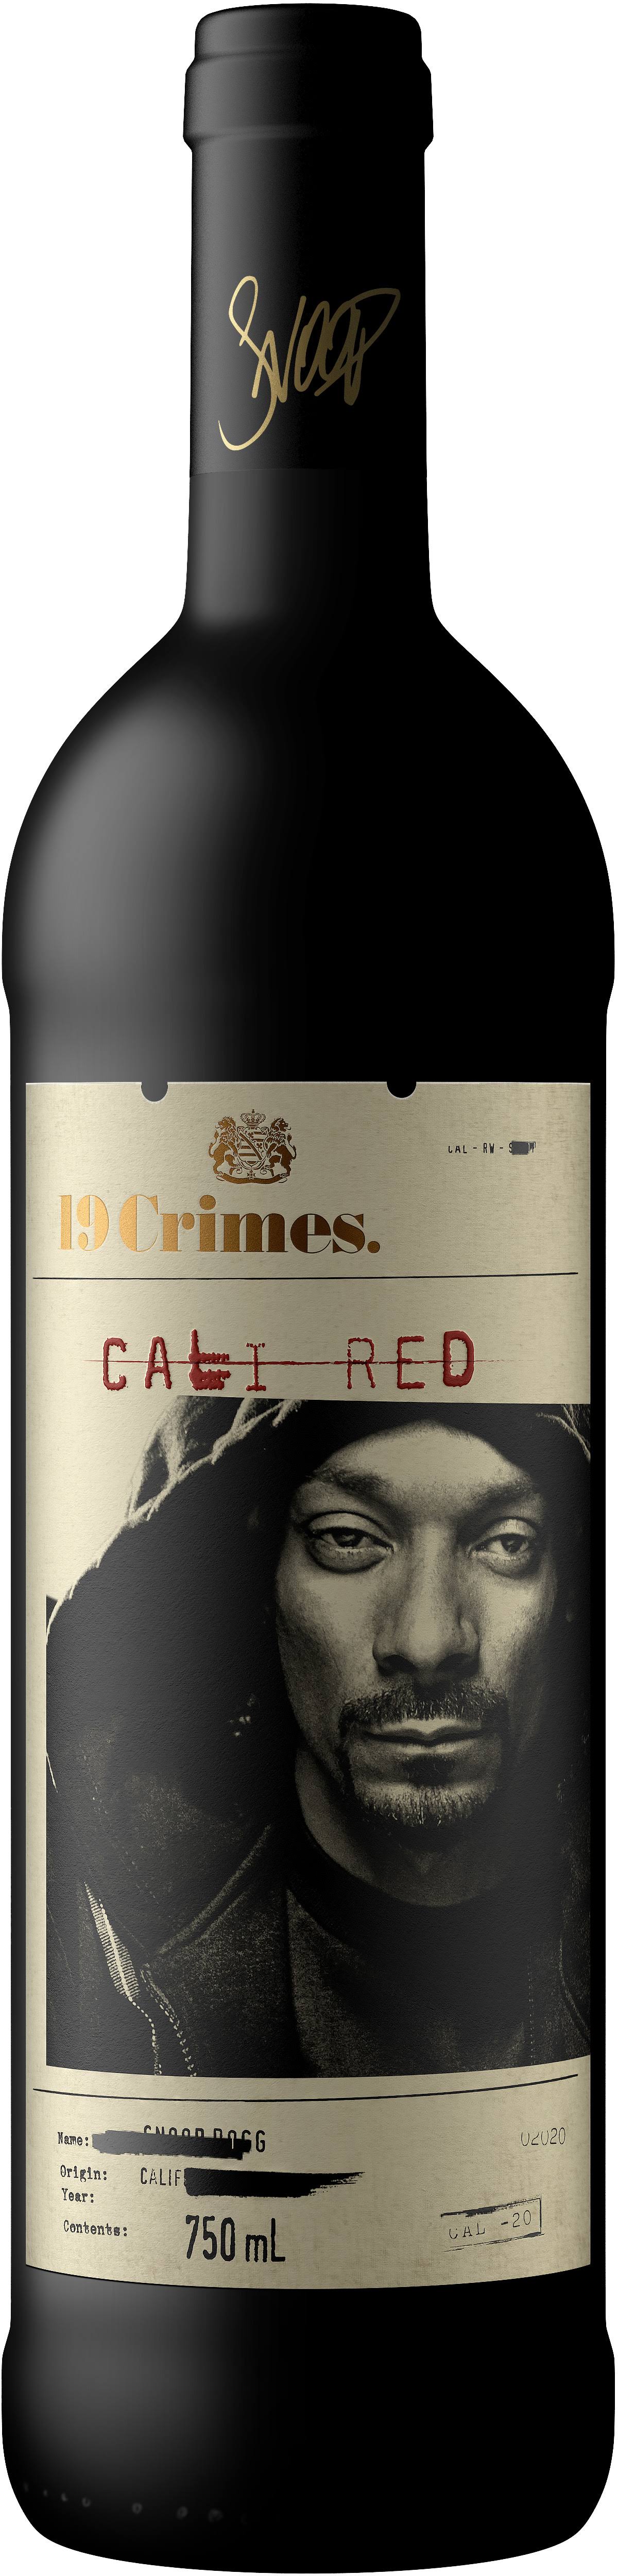 19 Crimes Cali by Snoop Red Wine 75cL